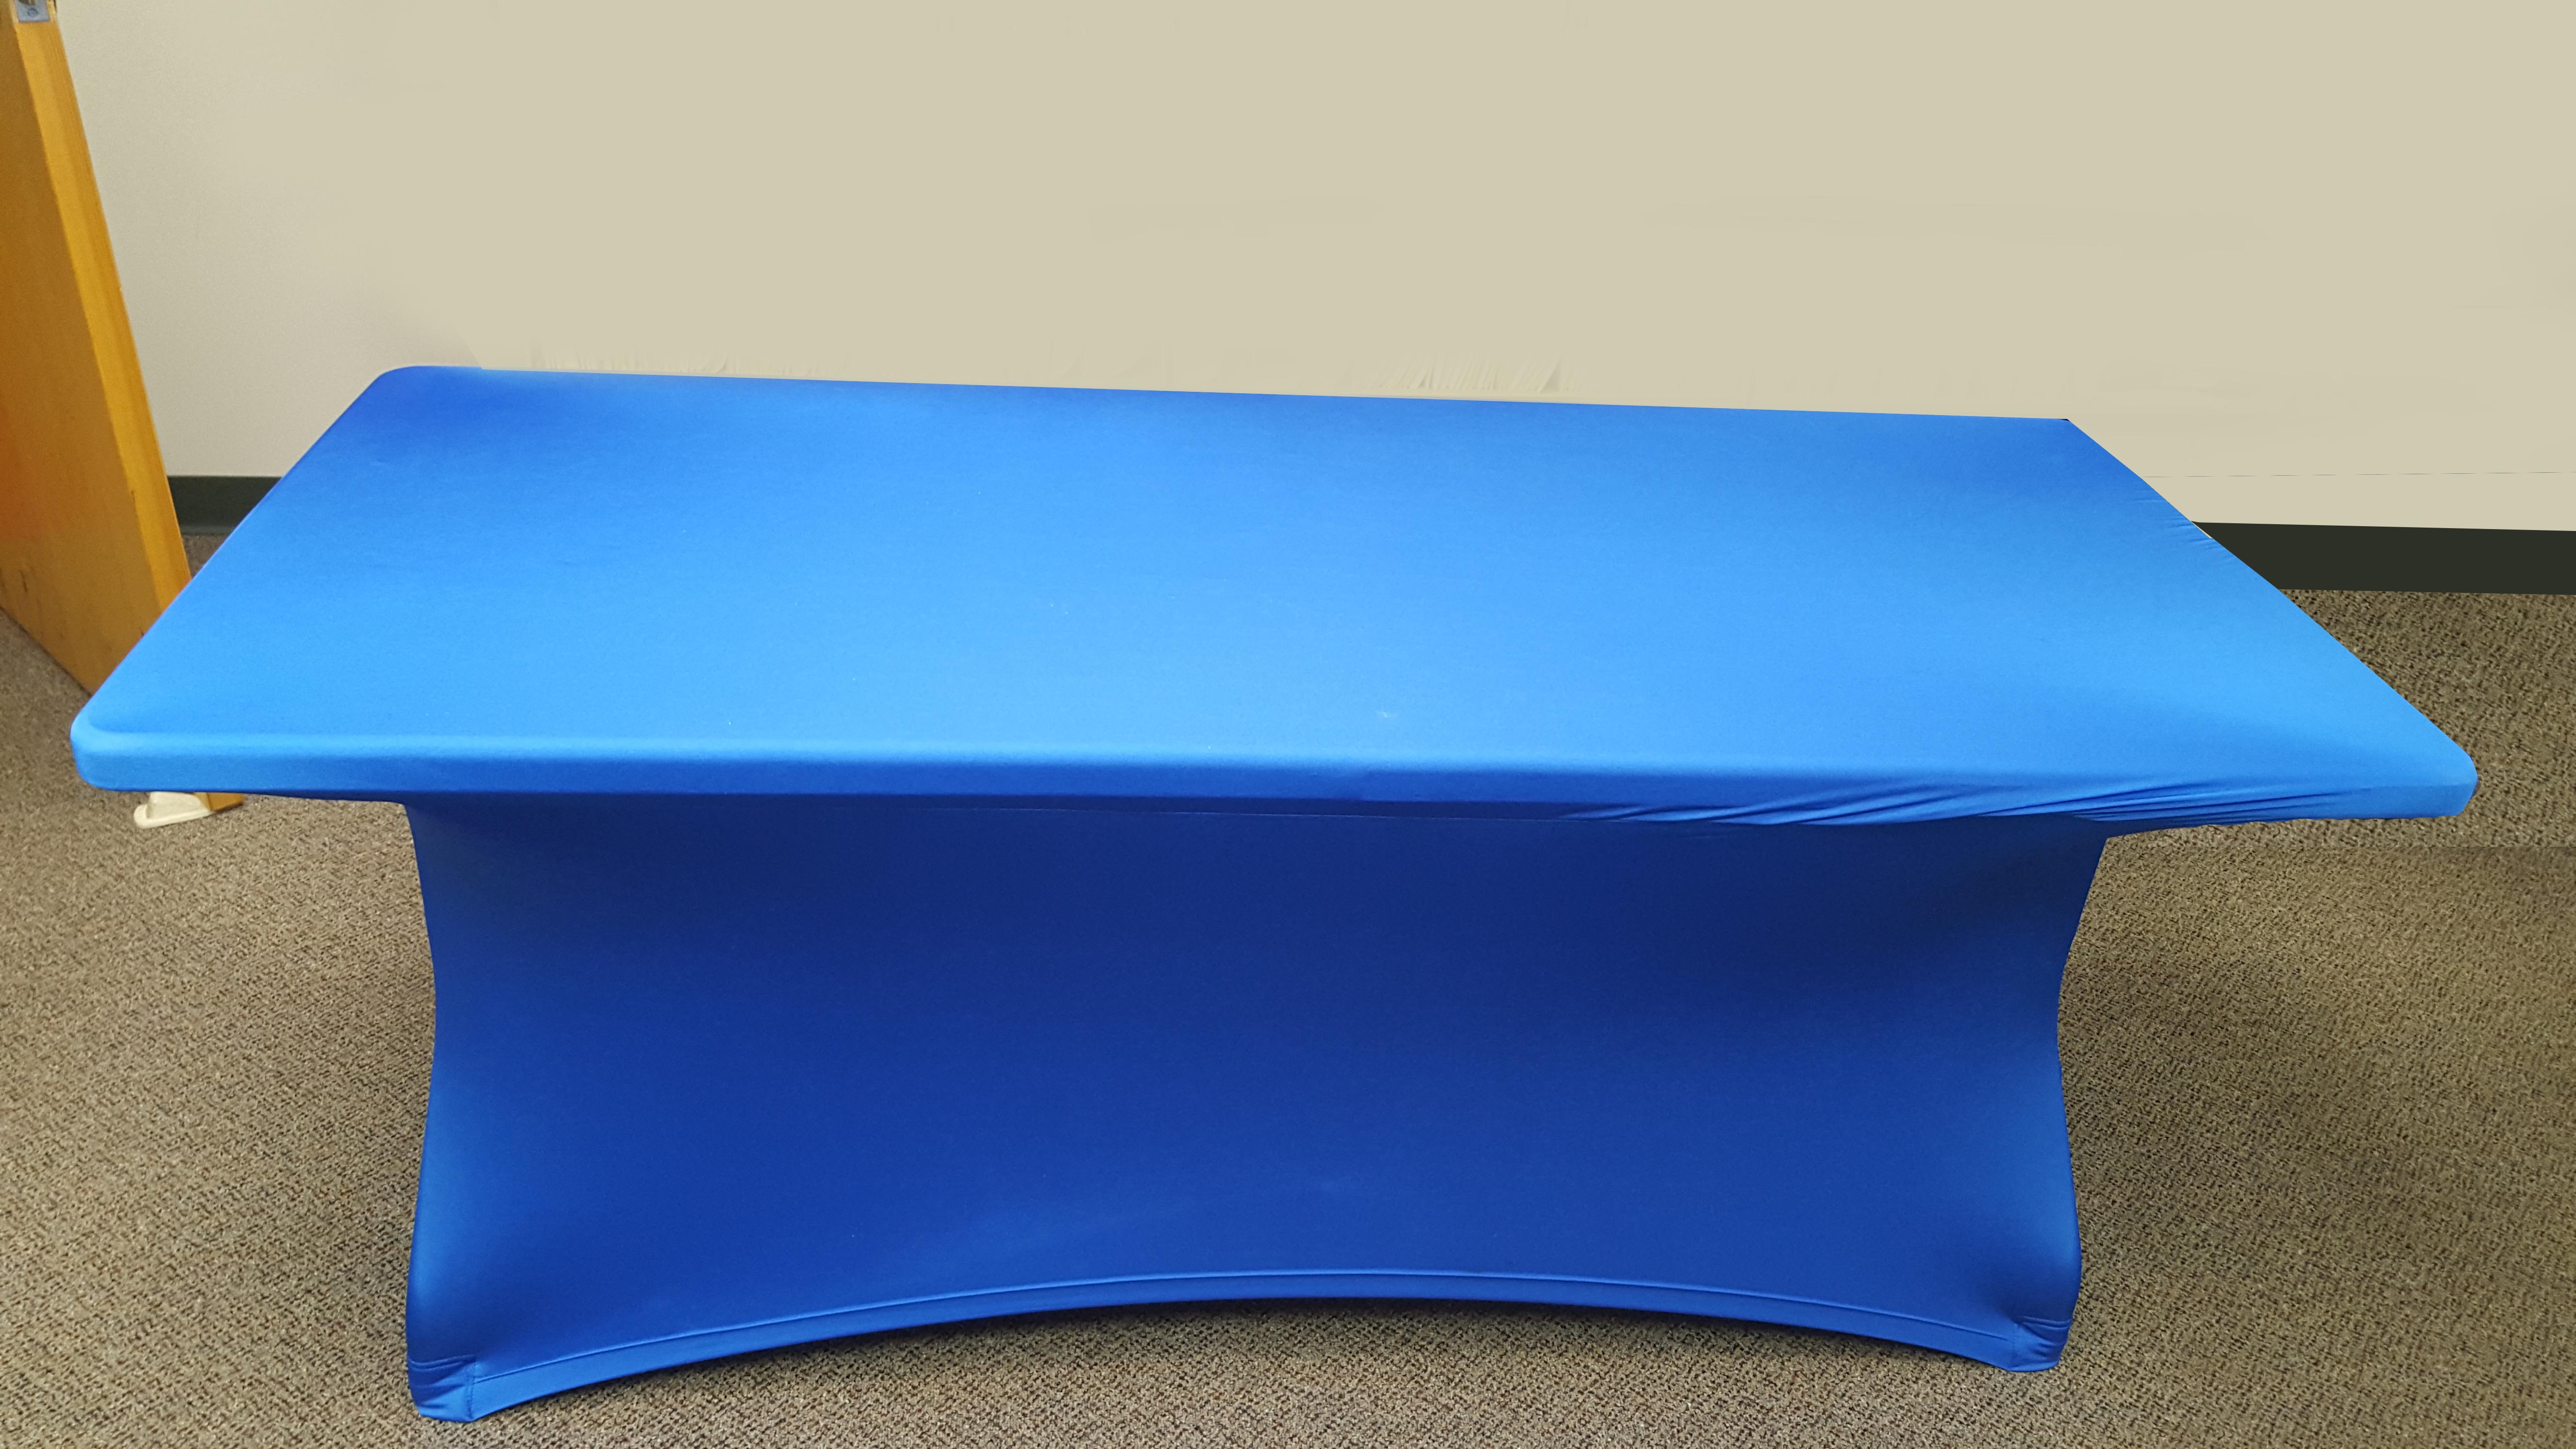 After-Transform Your Dull, Unsightly Table Into an Attractive Stretch Fabric Covered Surface